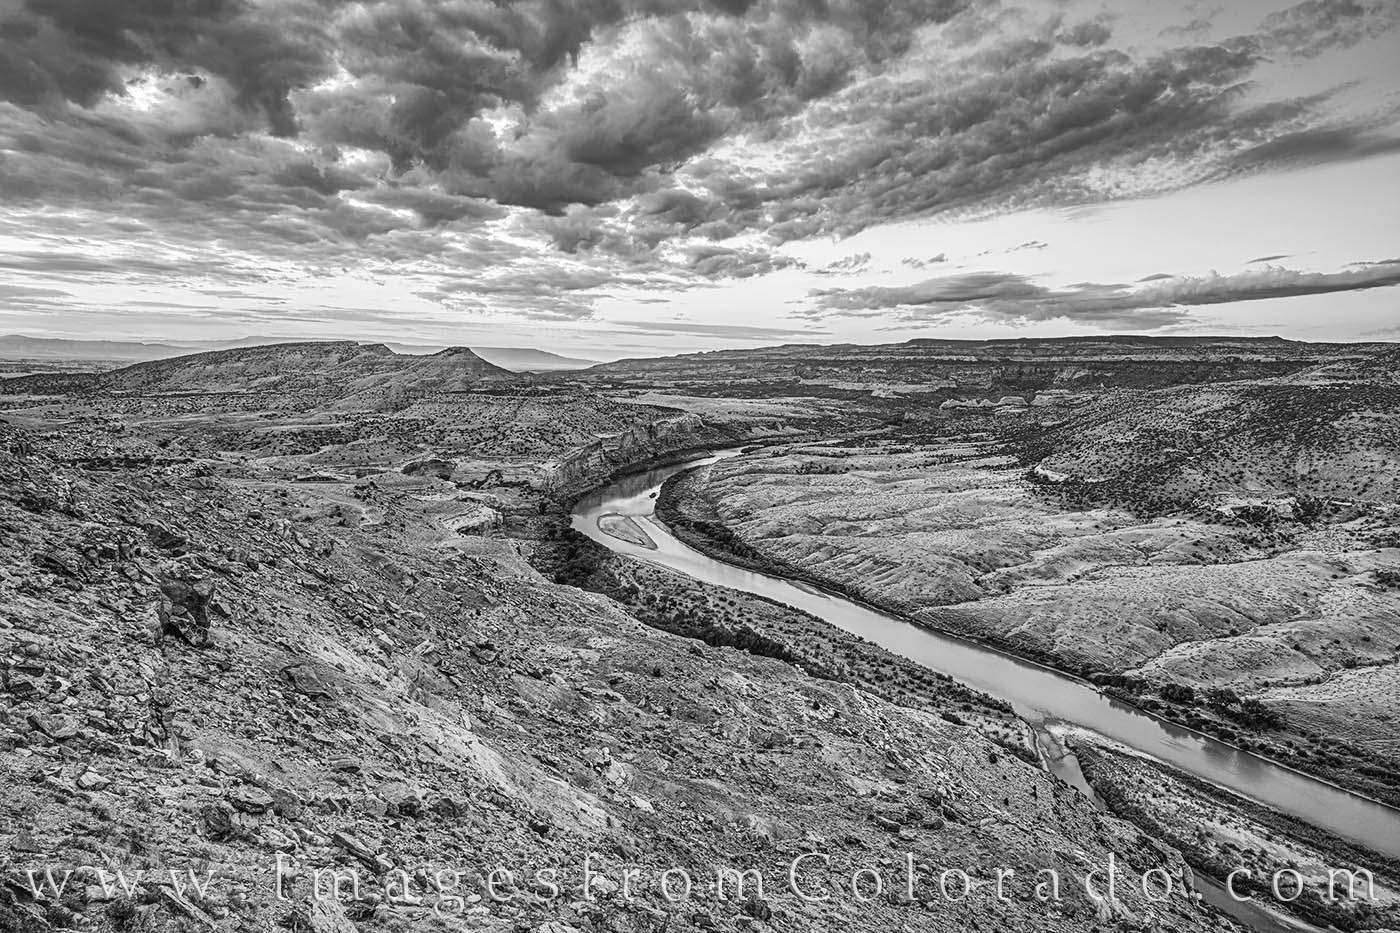 Mack Point offers an amazing view over the Colorado River. This black and white image looks east at sunrise and features the...